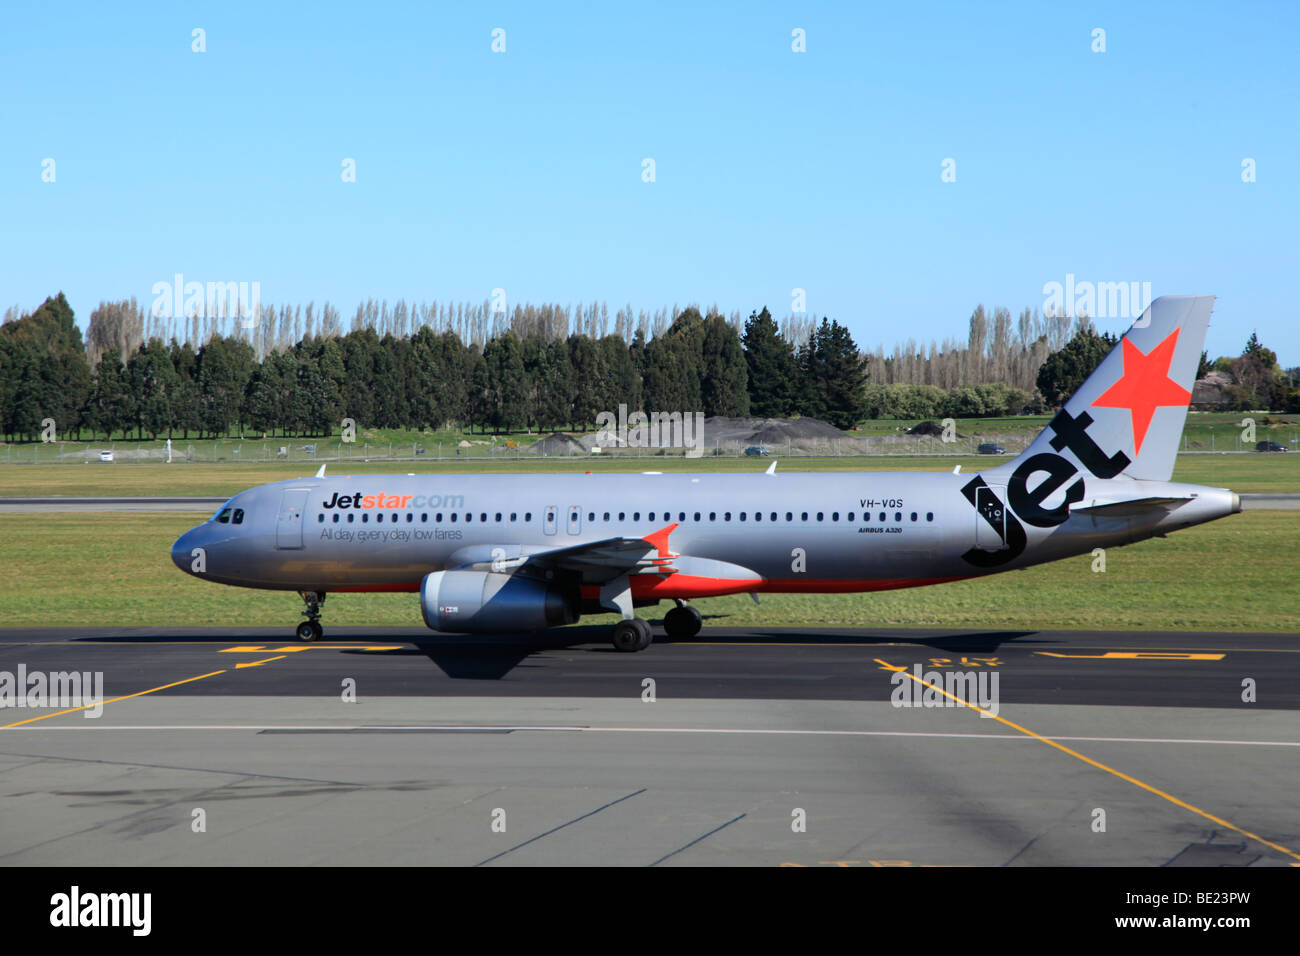 Jet Star airline Airbus A320 232 VH-VQS at Christchurch Airport, Canterbury,South Island,New Zealand Stock Photo